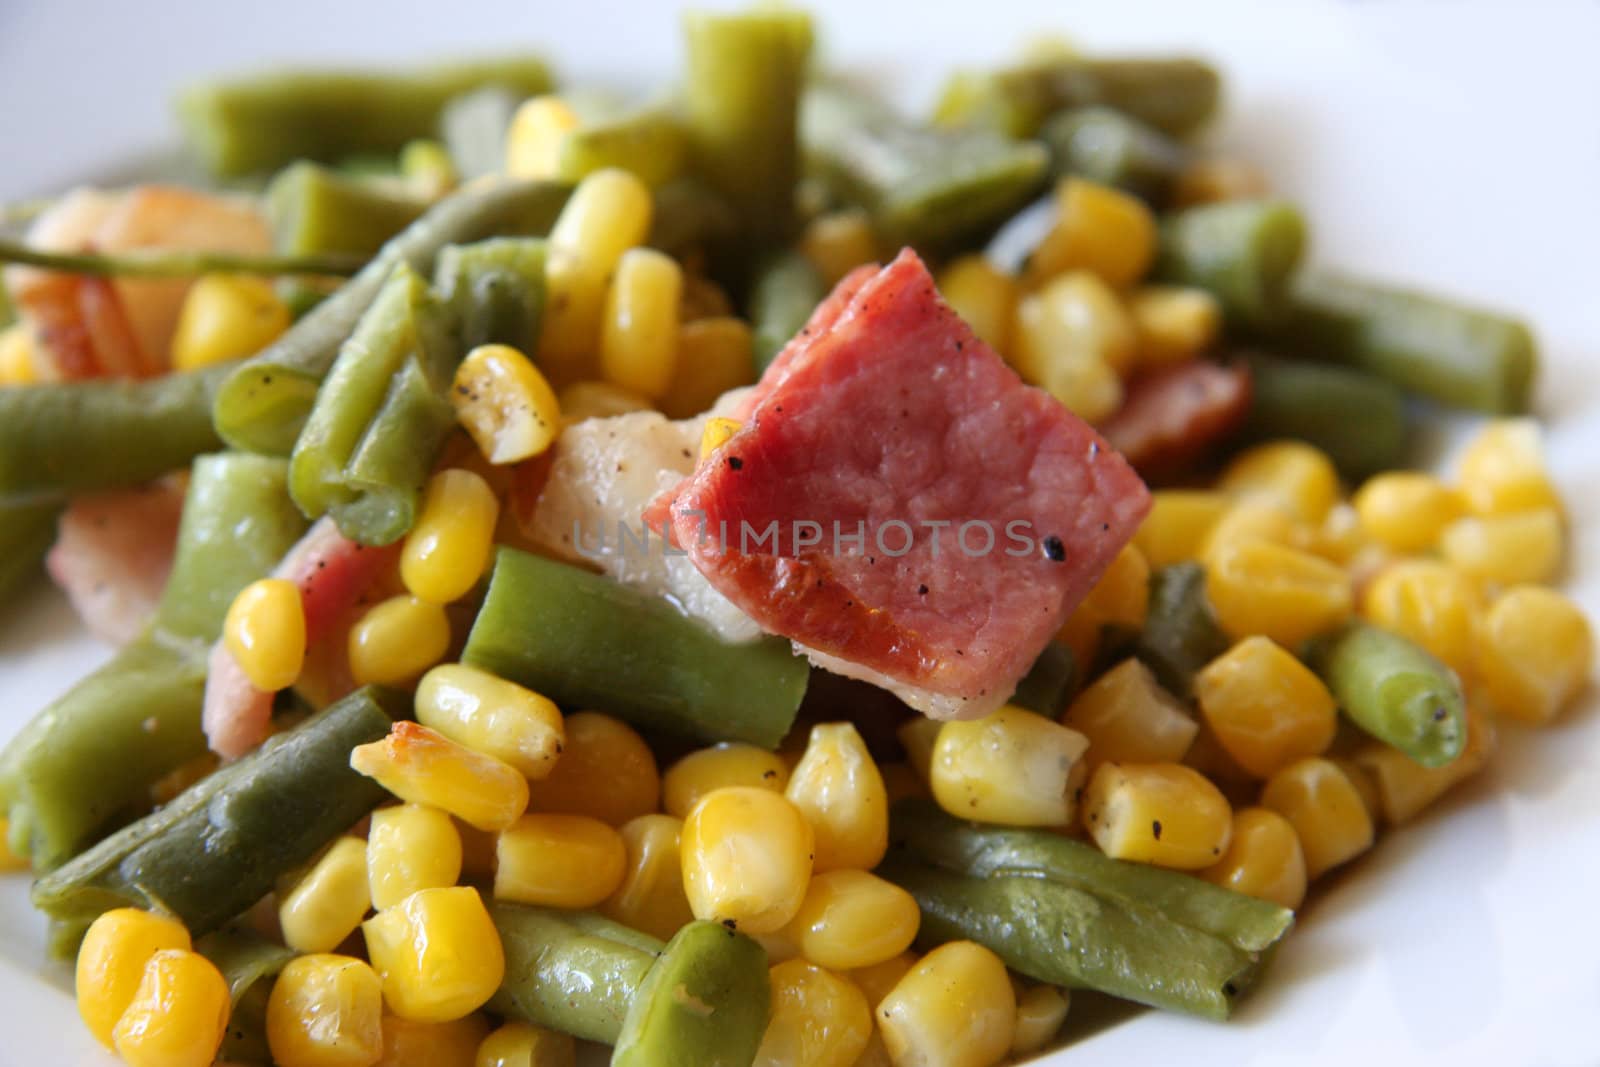 Salad with corn, broccoli and bacon on isolated white